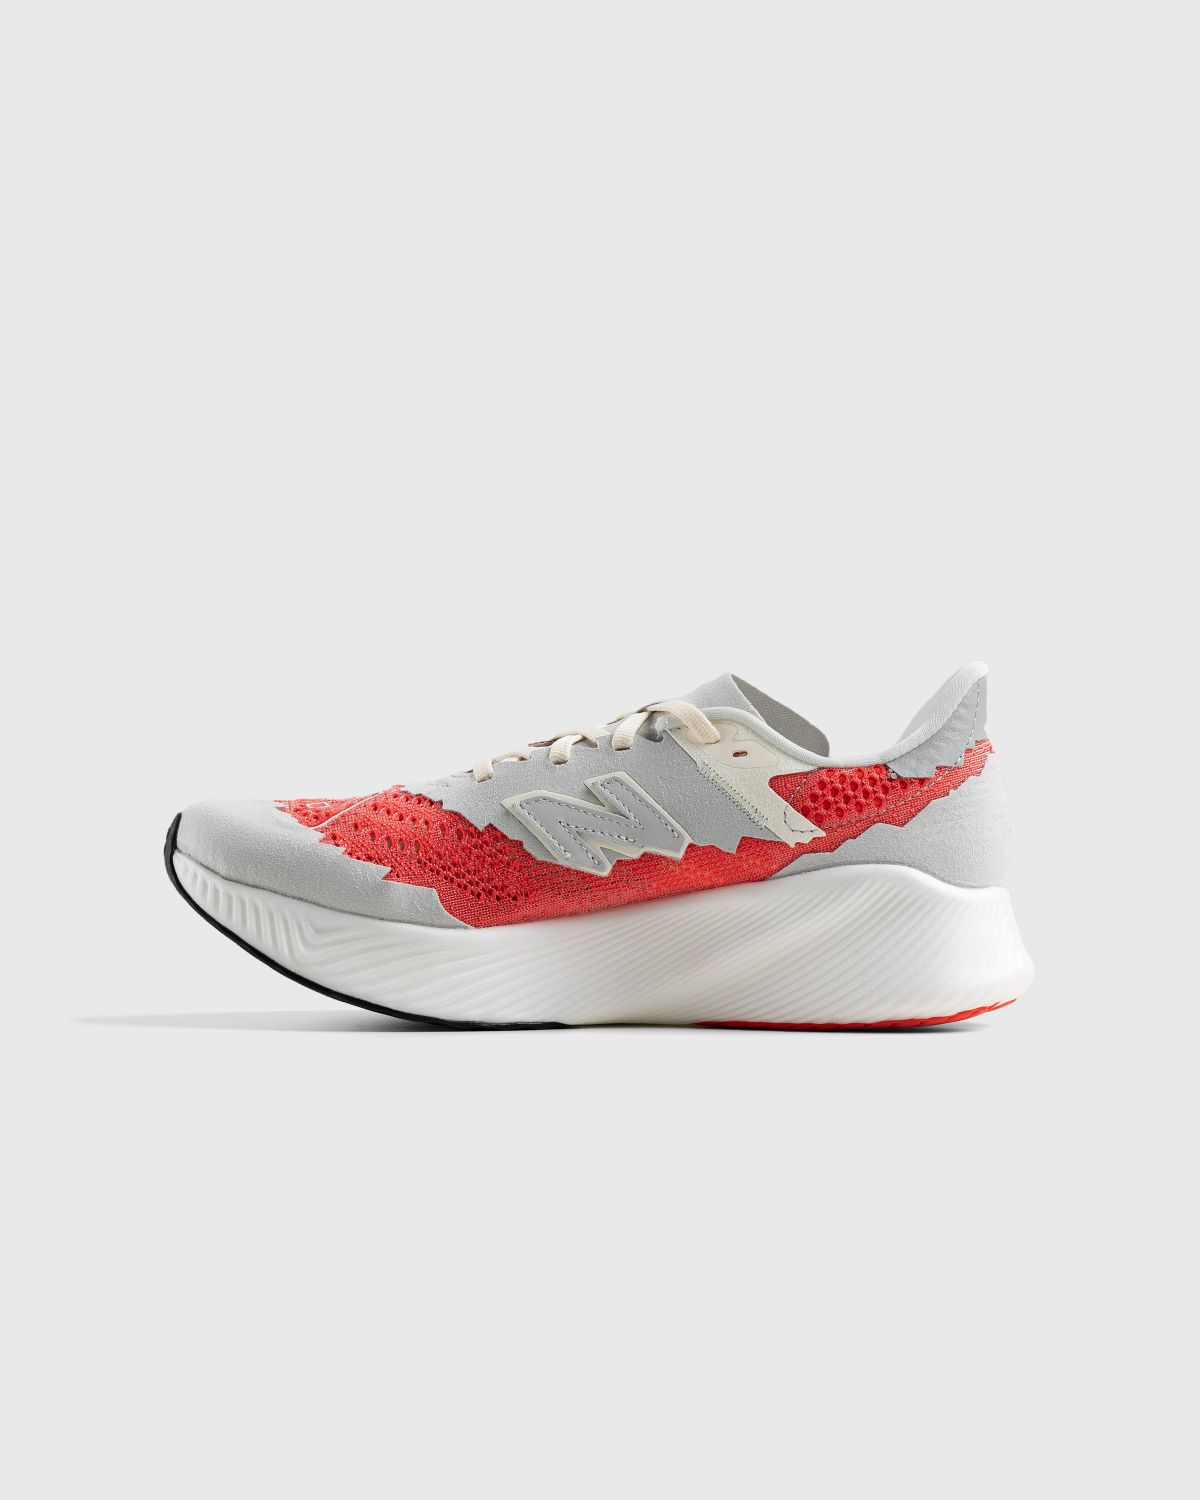 New Balance x Stone Island – FuelCell RC Elite v2 Neo Flame - Sneakers - Red - Image 2